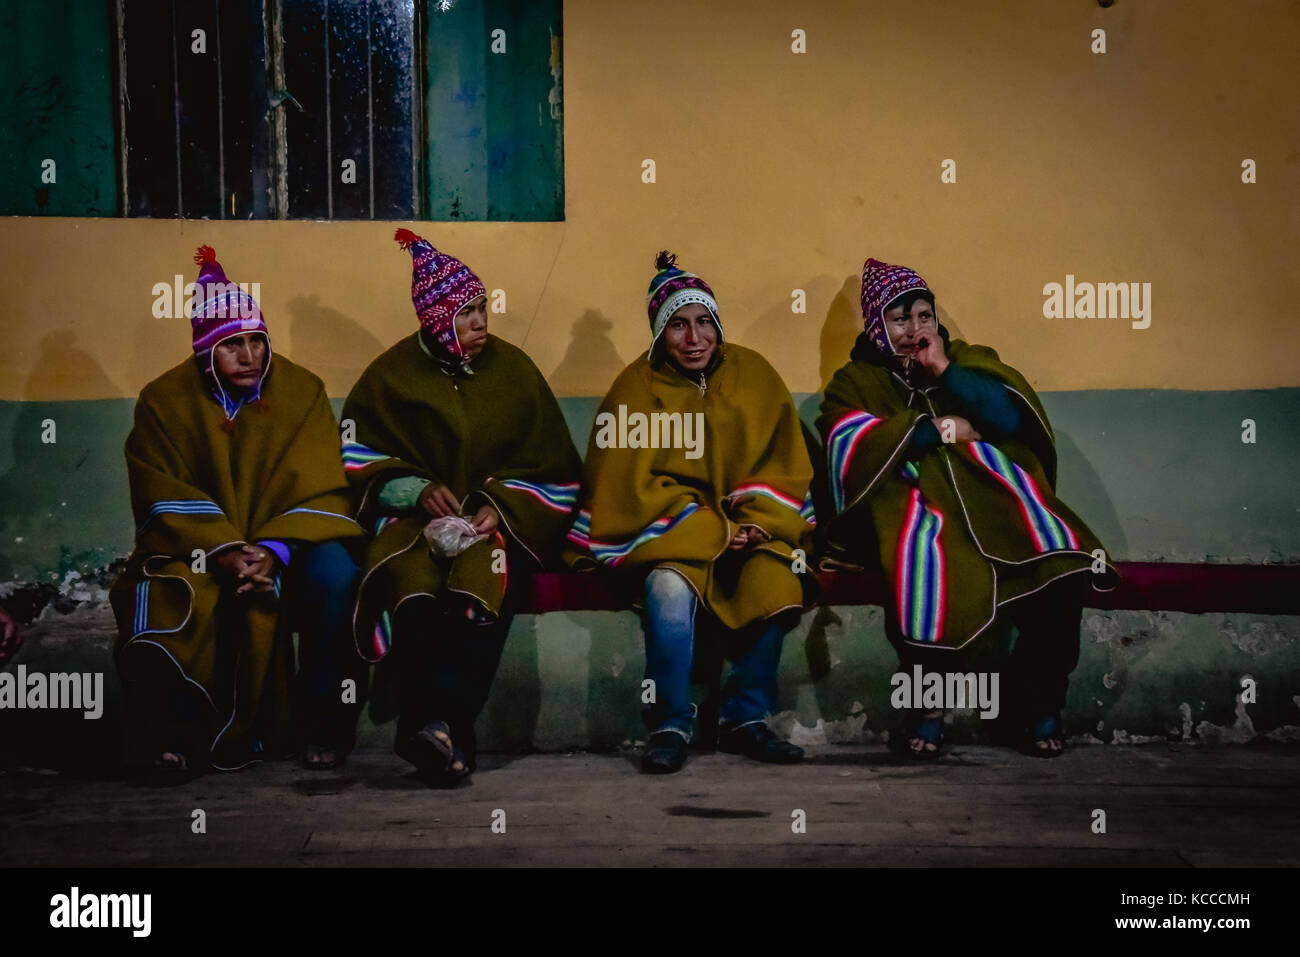 Peruvian men sat on bench in traditional dress Stock Photo